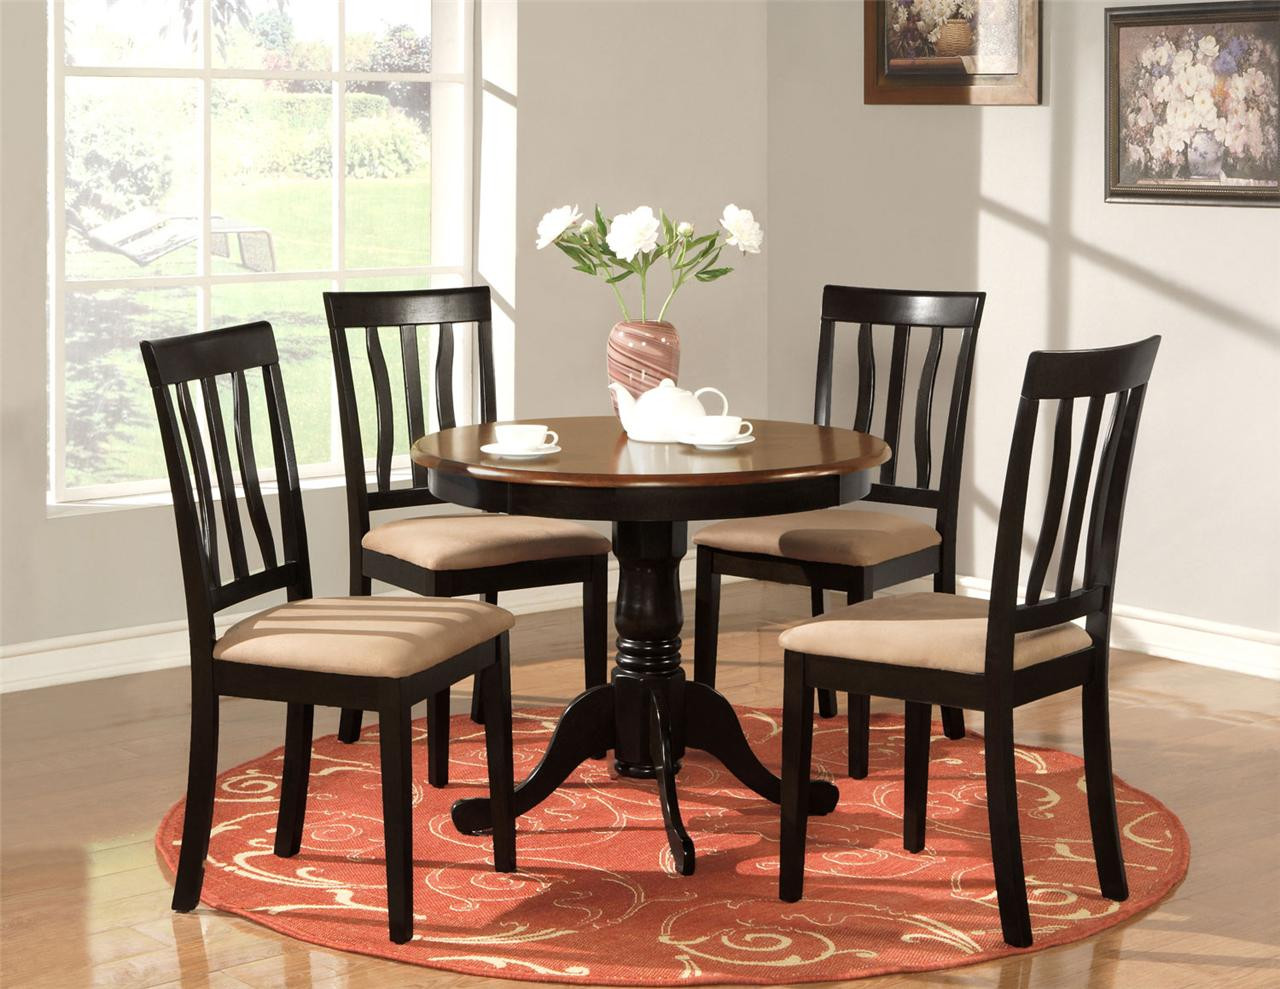 Small Round Kitchen Table Set
 Square vs Round Kitchen Tables What to Choose Traba Homes